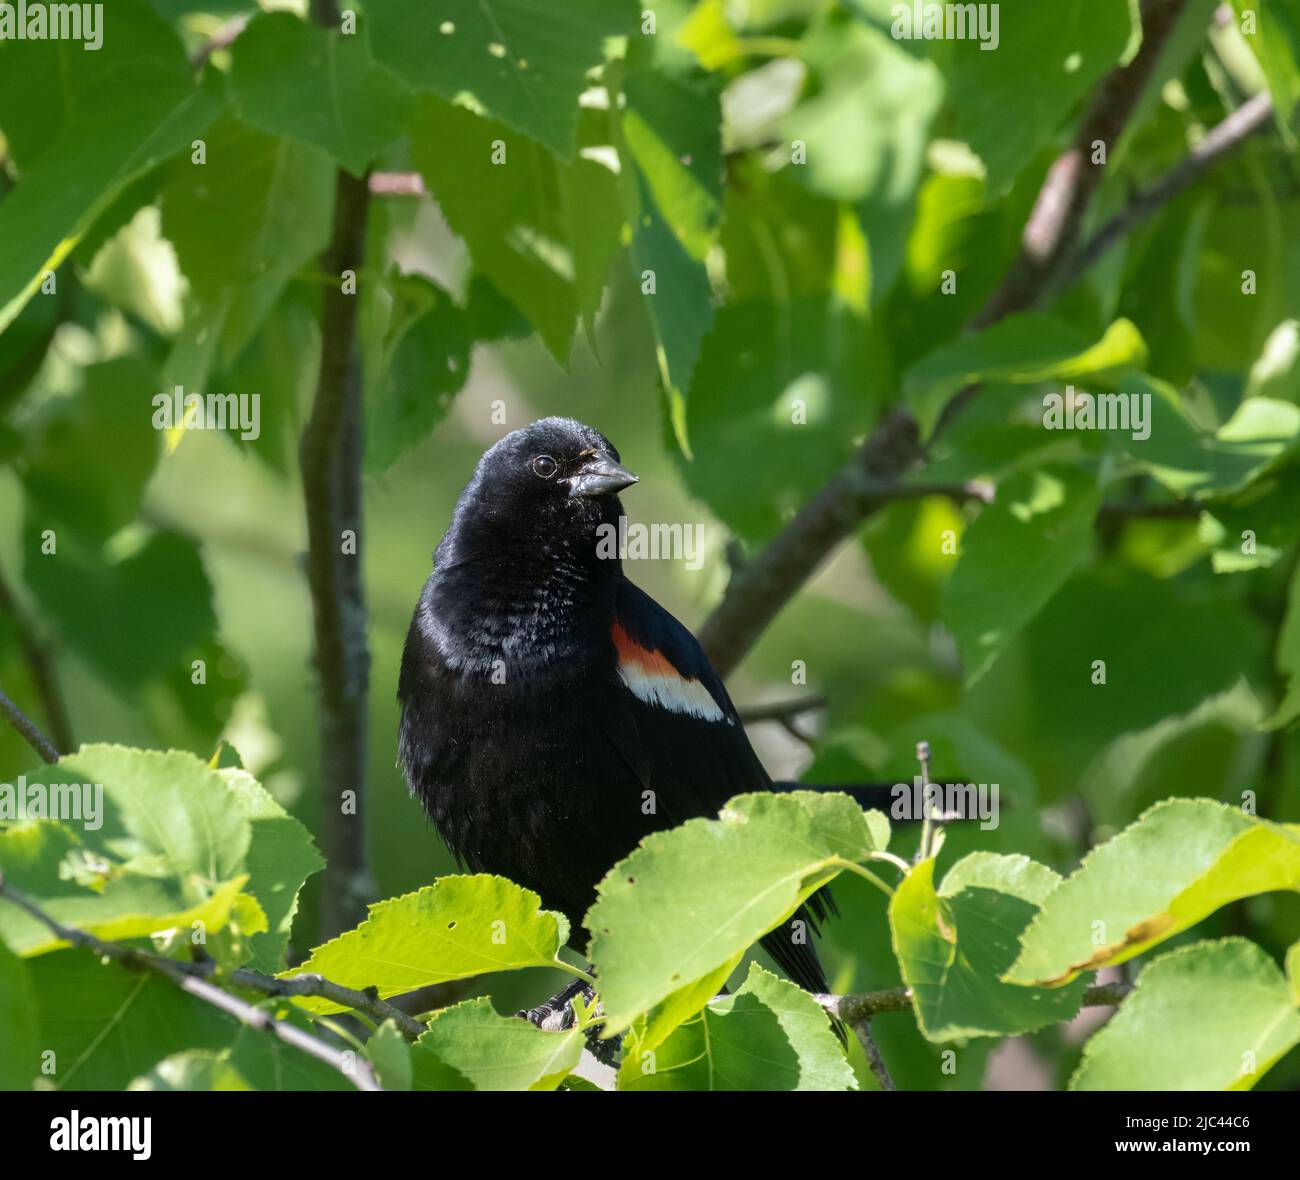 A closeup male Red-winged Blackbird in green foliage Stock Photo